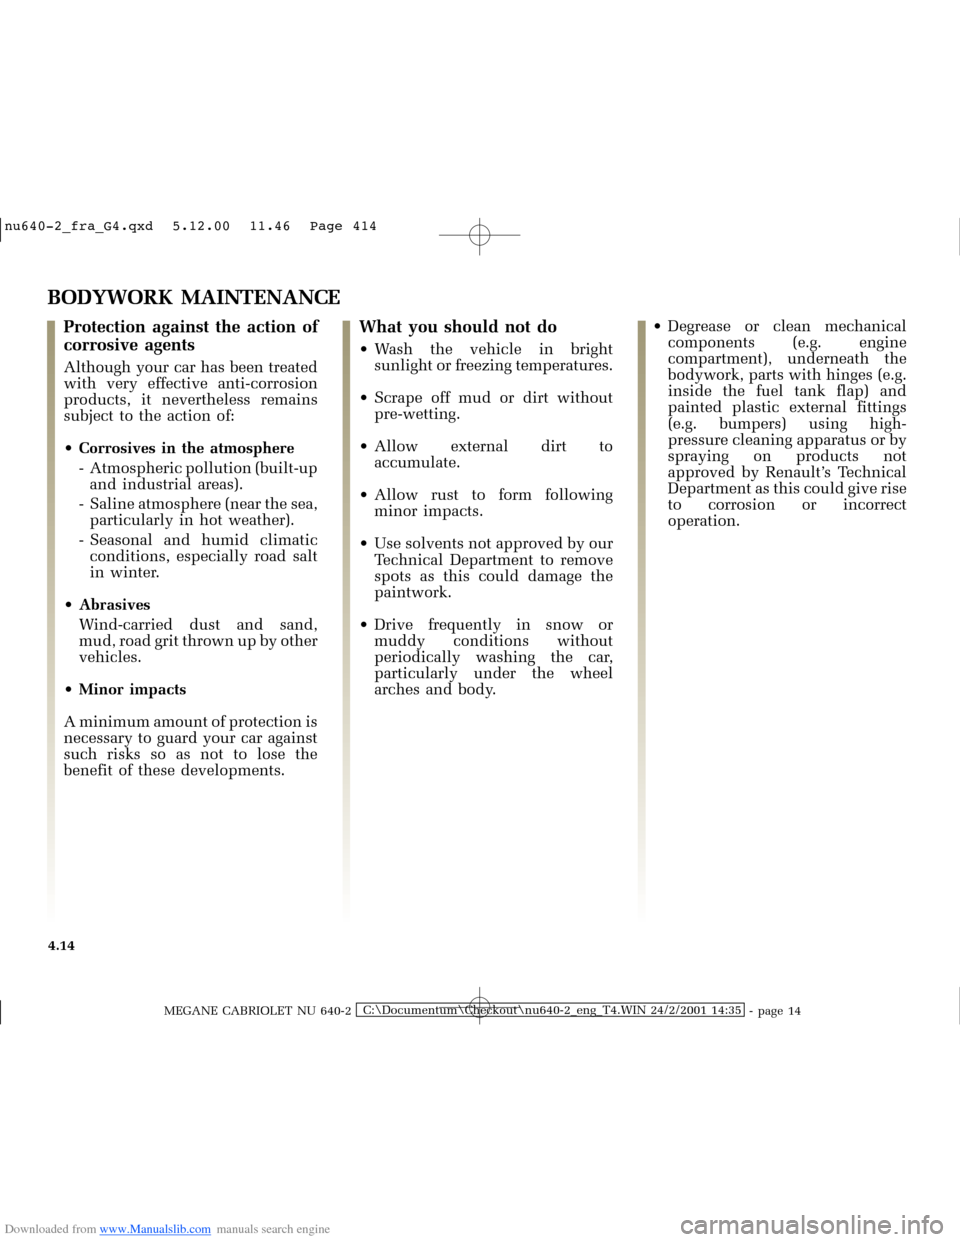 RENAULT MEGANE 2000 X64 / 1.G Owners Manual Downloaded from www.Manualslib.com manuals search engine �Q�X������B�I�U�D�B�*���T�[�G� � �������� � ������ � �3�D�J�H� ���
MEGANE CABRIOLET NU 640-2C:\Documentum\Checkout